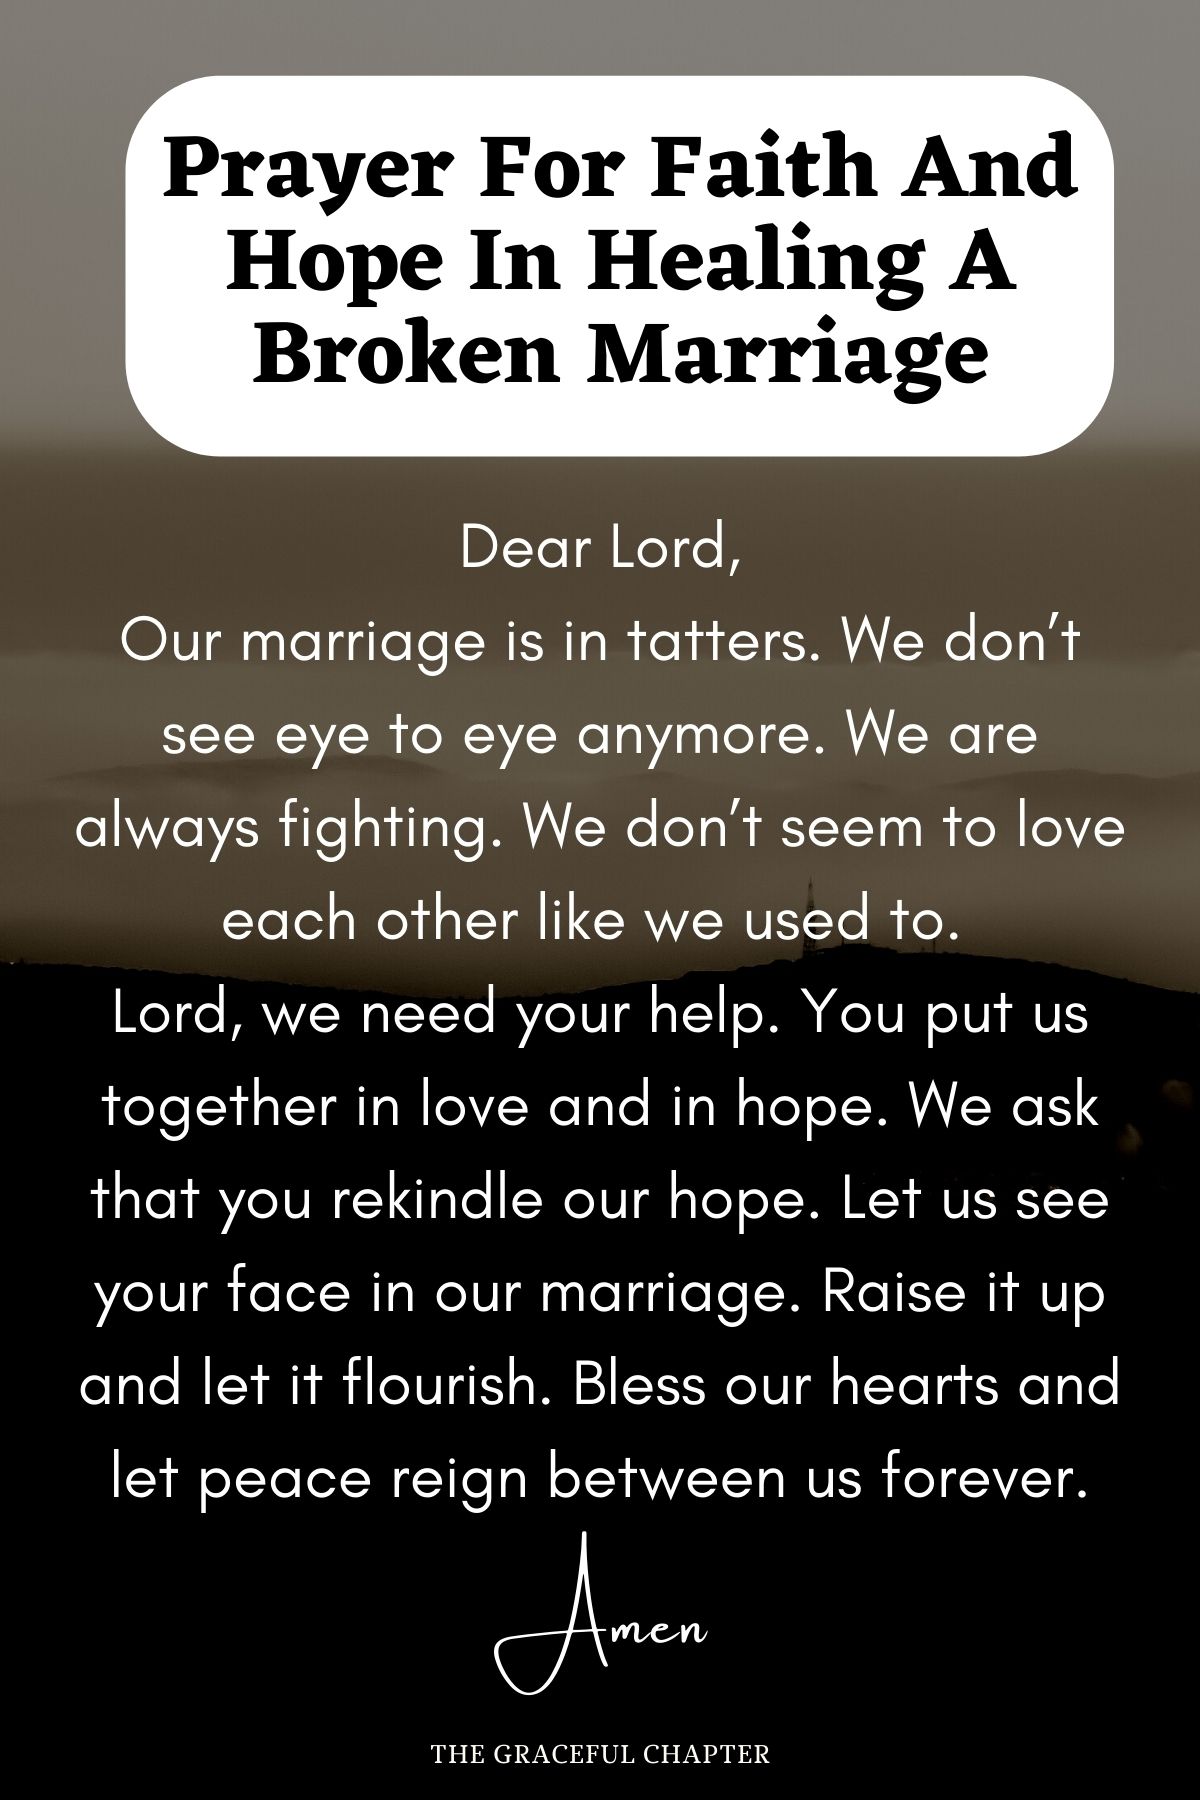 Prayer for faith and hope in healing a broken marriage